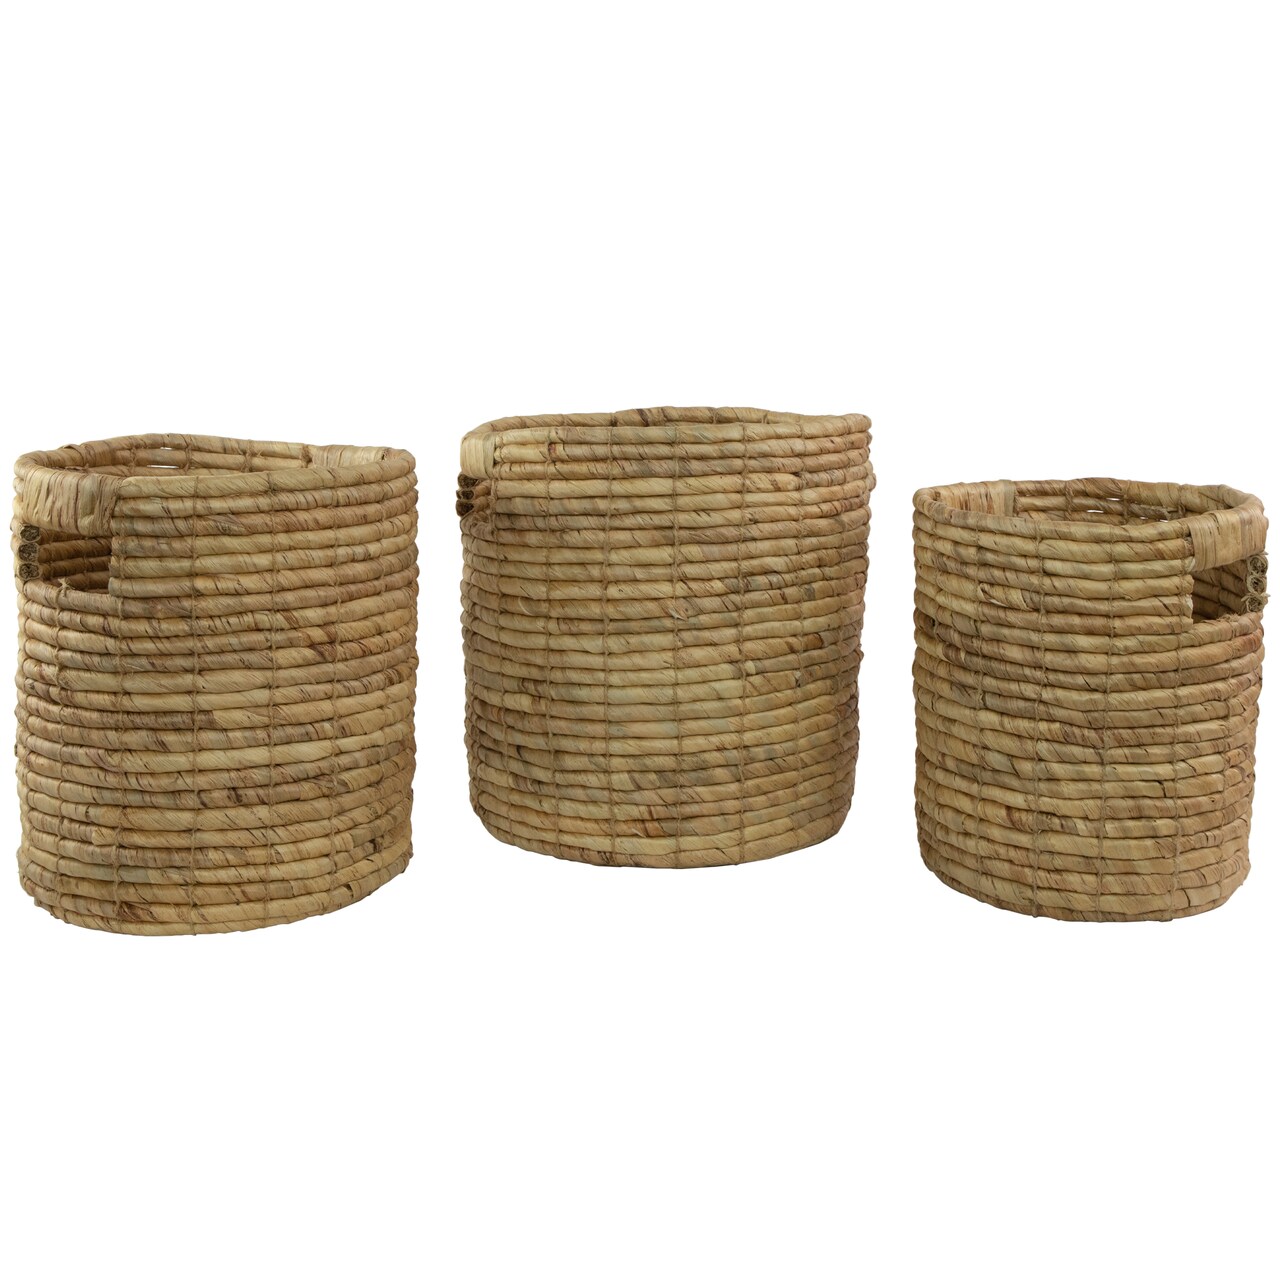 Northlight Set of 3 Light Brown Natural Woven Table and Floor Cylindrical Seagrass Baskets